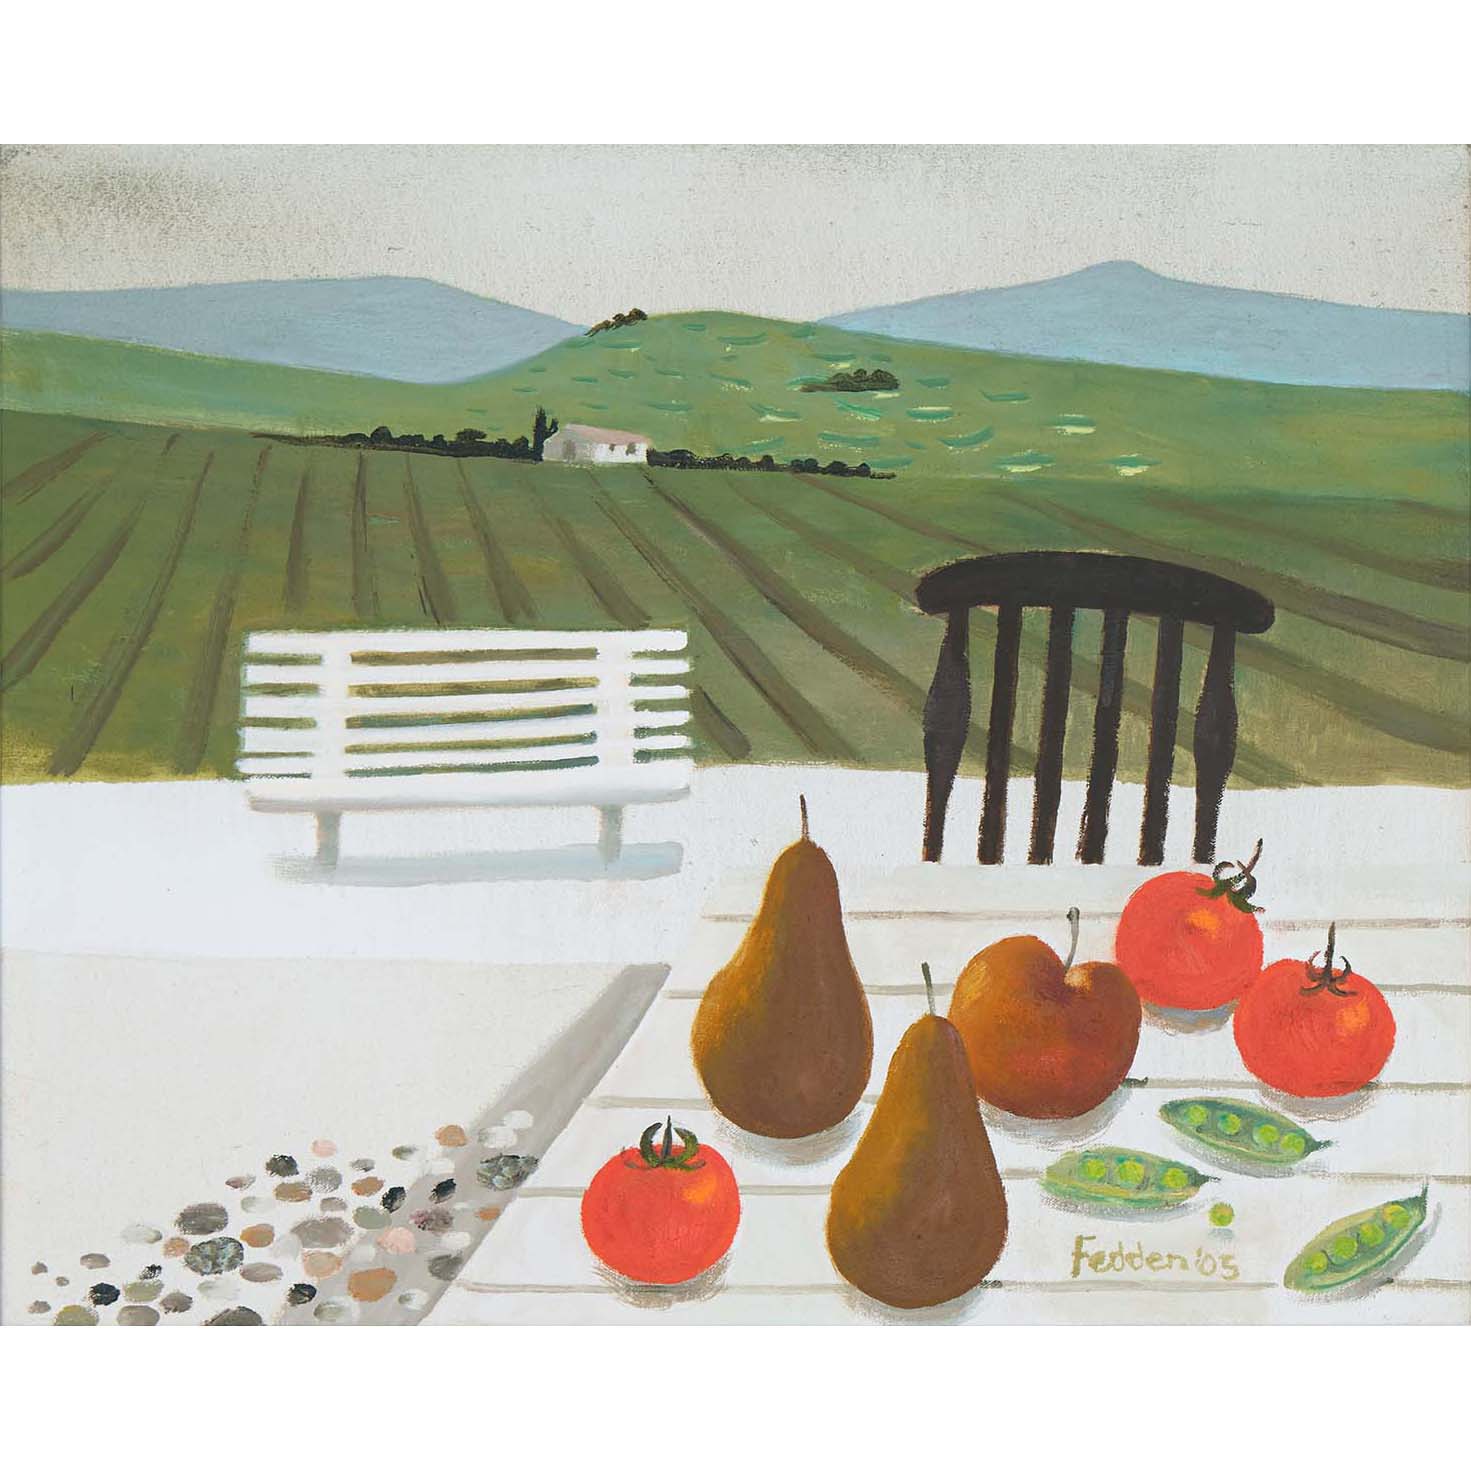 MARY FEDDEN. TUSCAN LANDSCAPE. 2005. SOLD